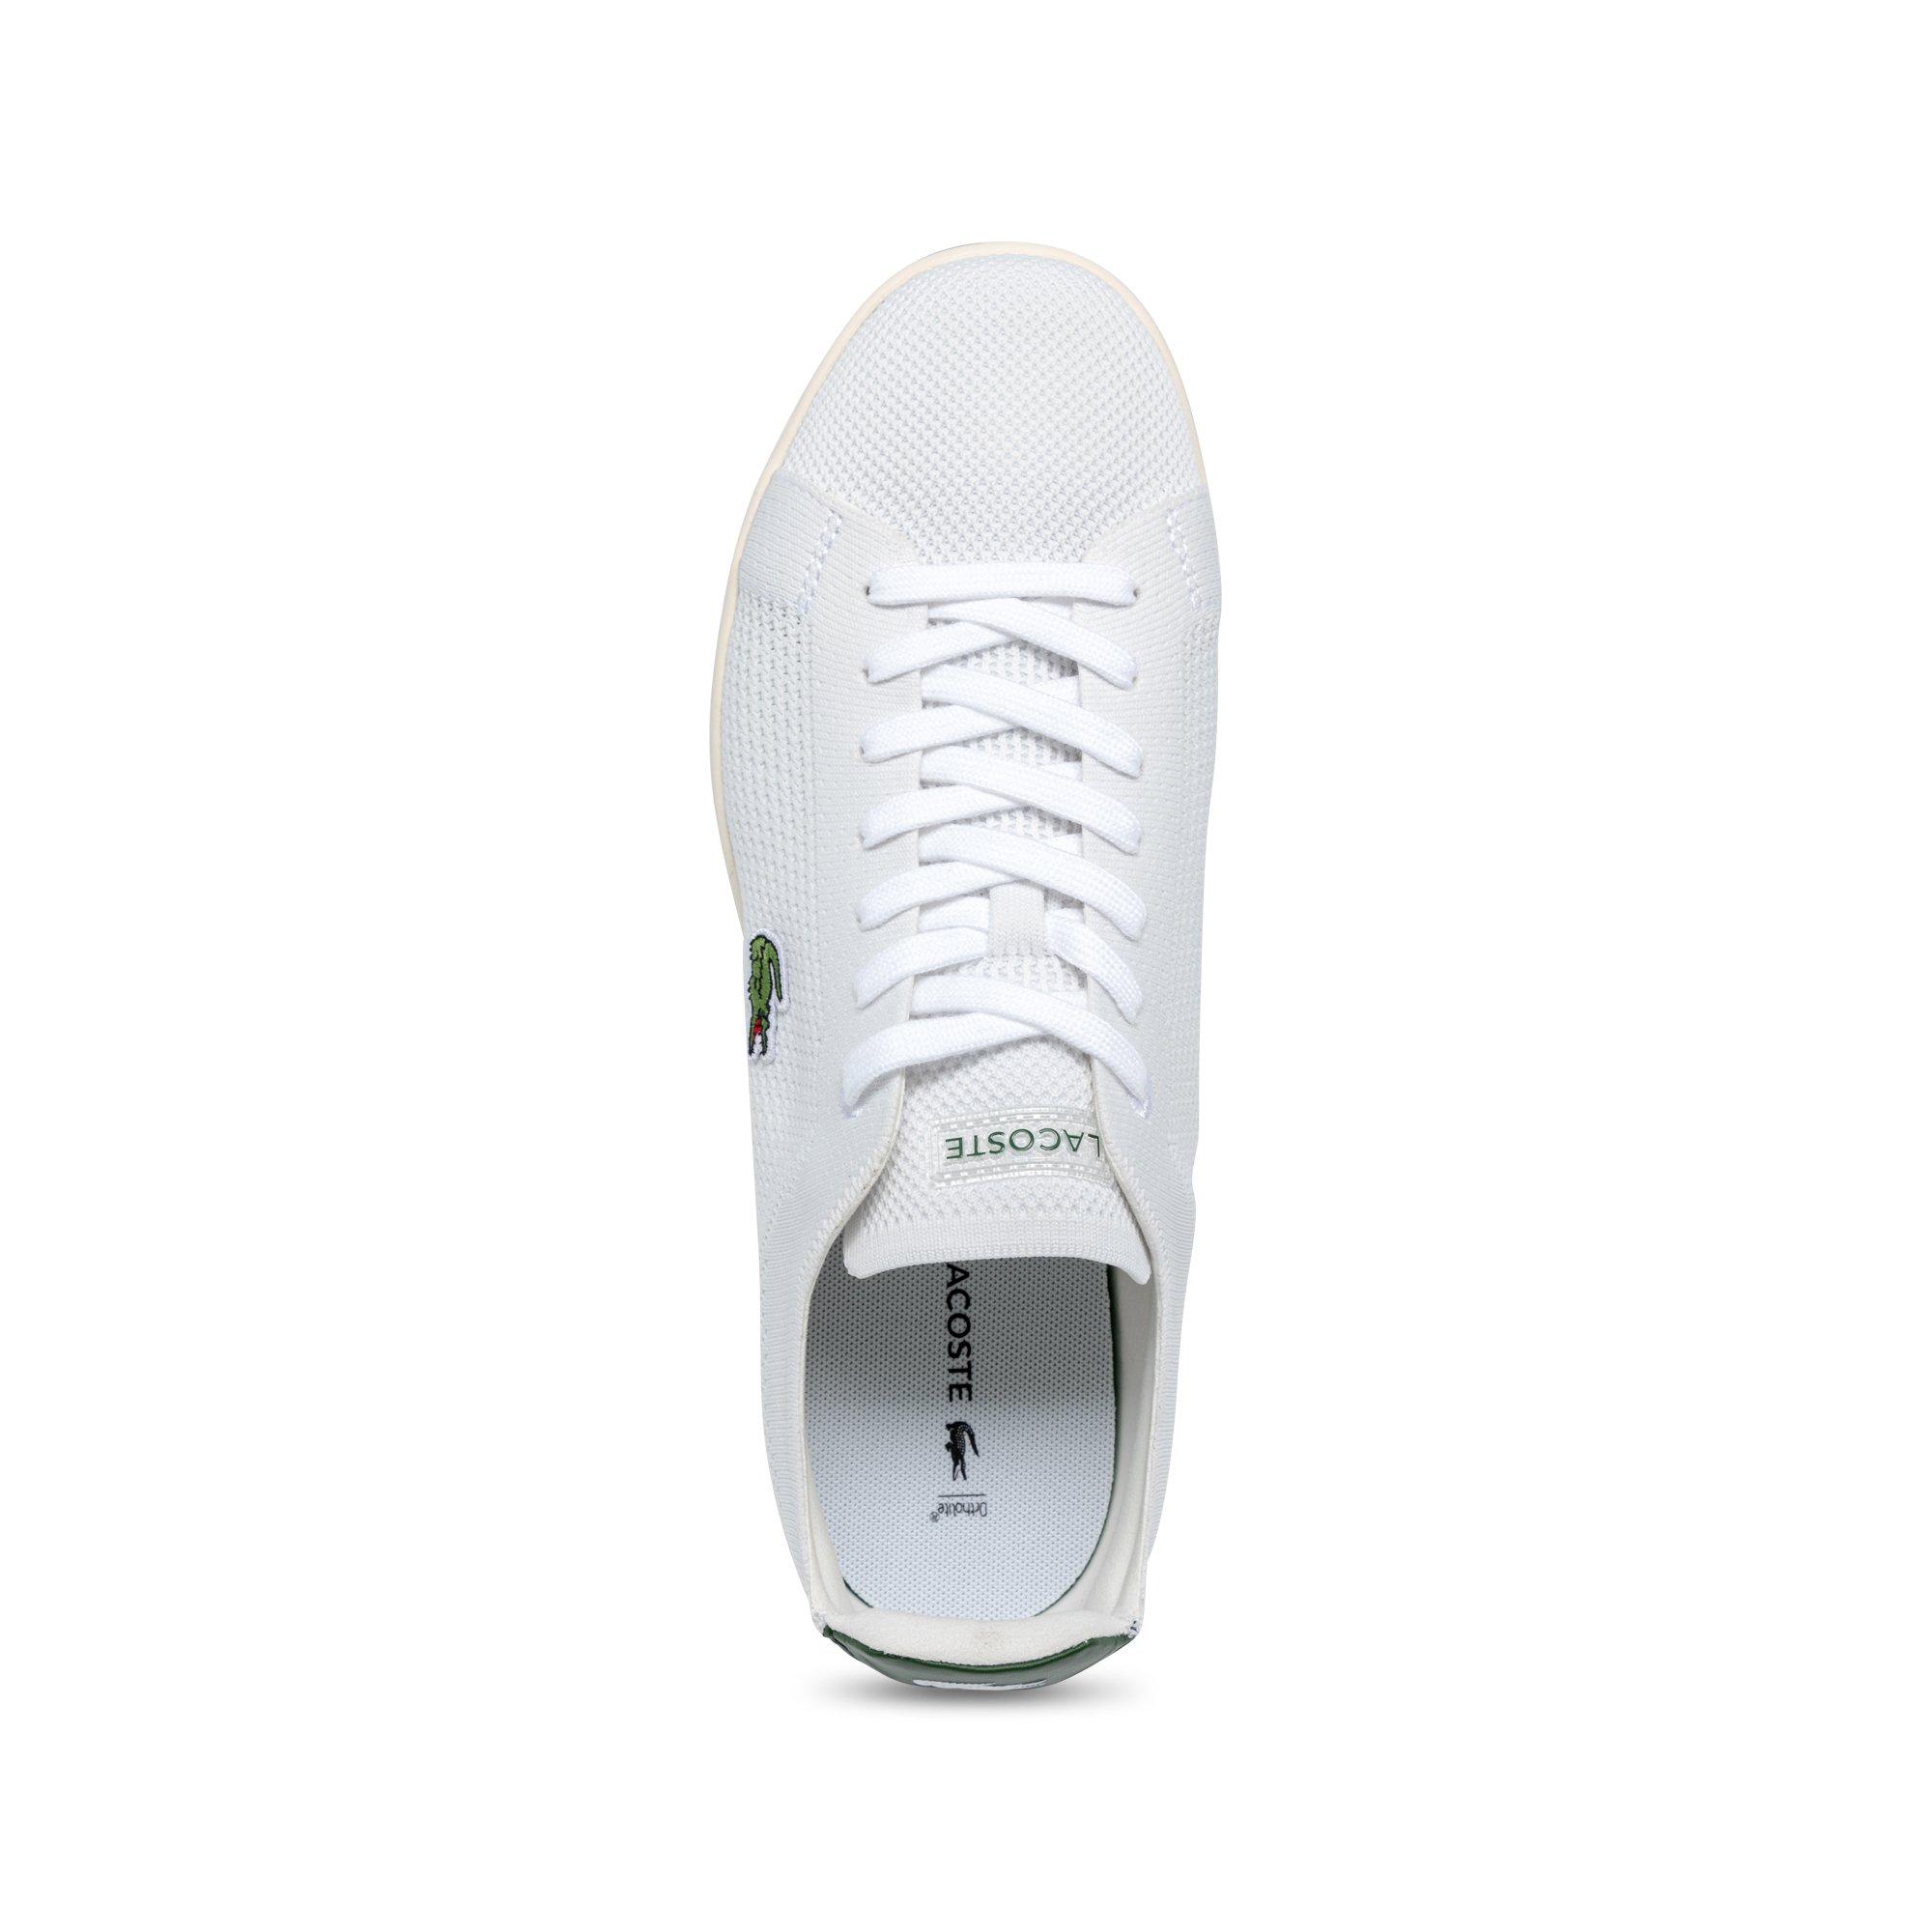 LACOSTE Carnaby Piquee Sneakers, Low Top 